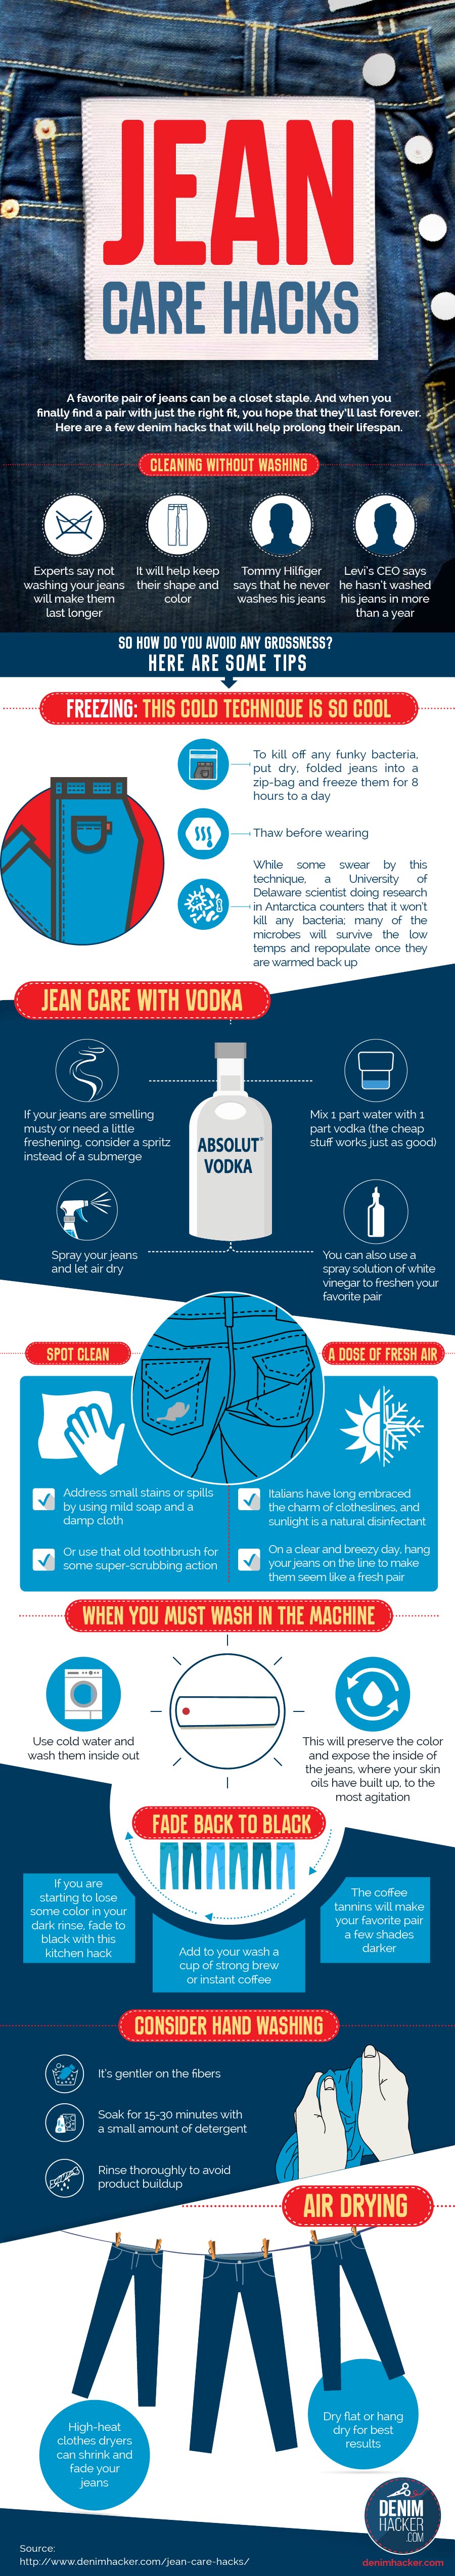 How To Clean Your Jeans Without Washing Them - Infographic